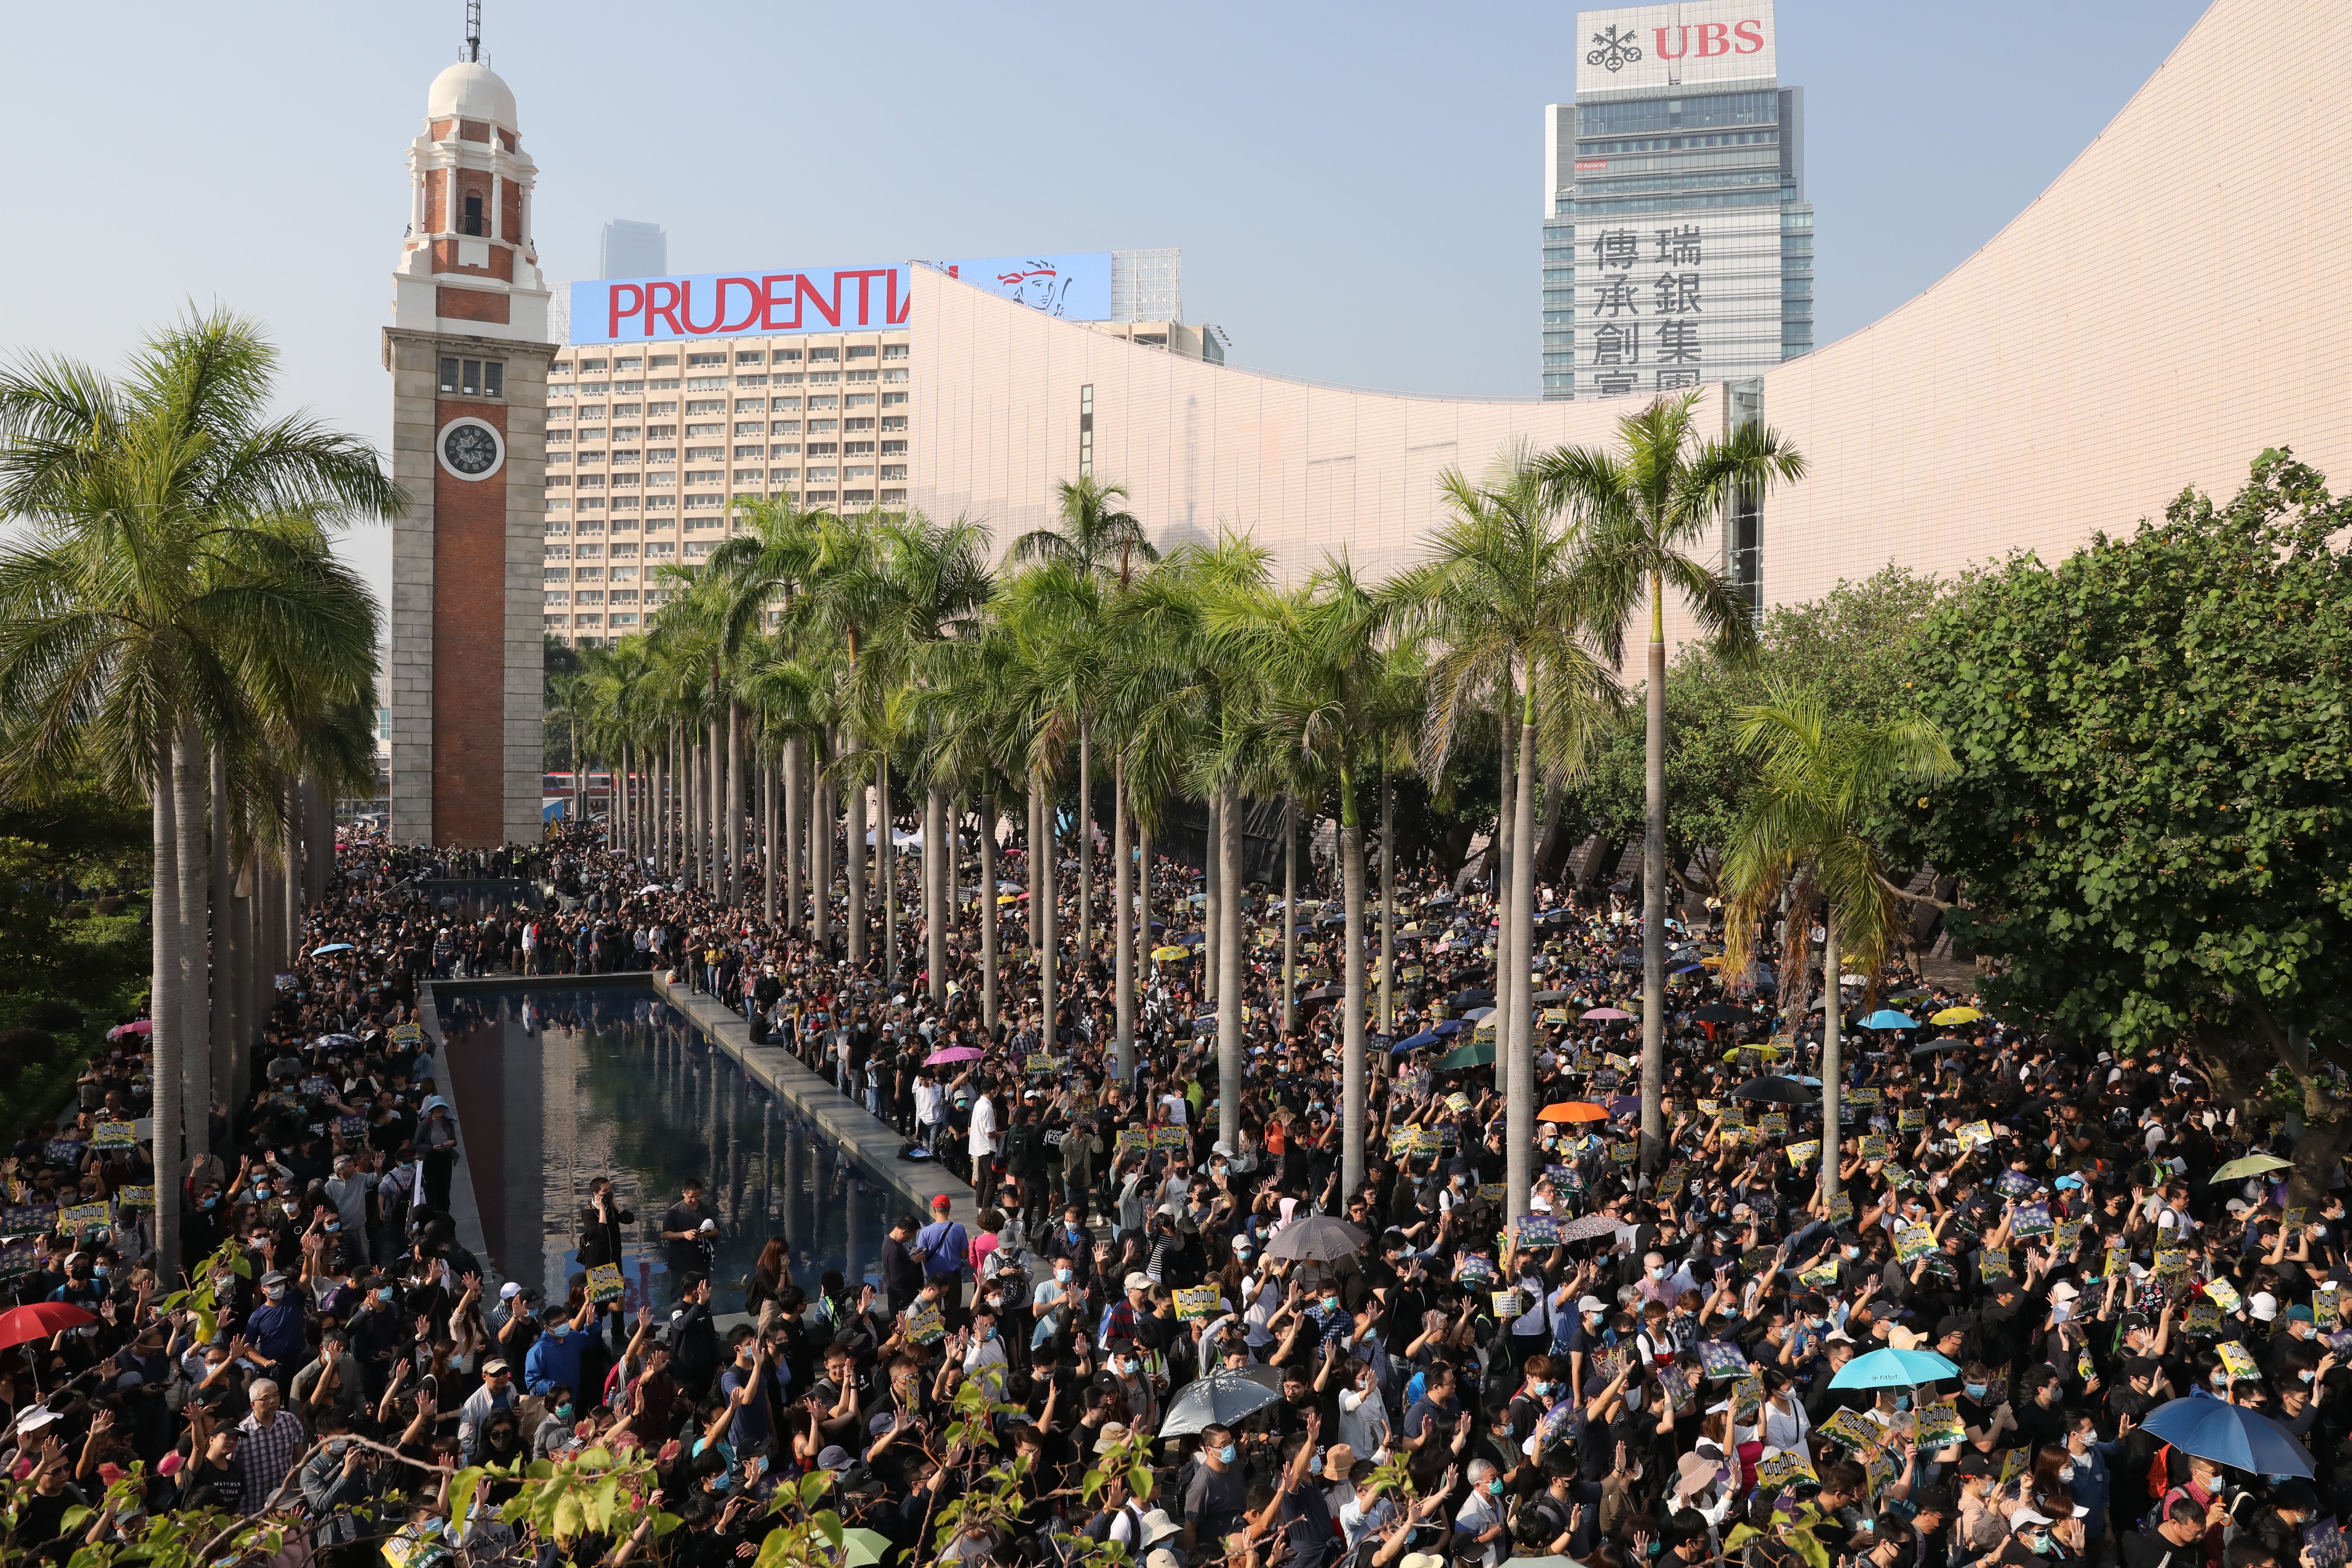 Thousands of protesters return to the streets of Hong Kong’s tourist district Tsim Sha Tsui for an approved march on December 1, a week after the pro-democracy bloc scored a landslide victory in the district council elections. Photo: K.Y. Cheng